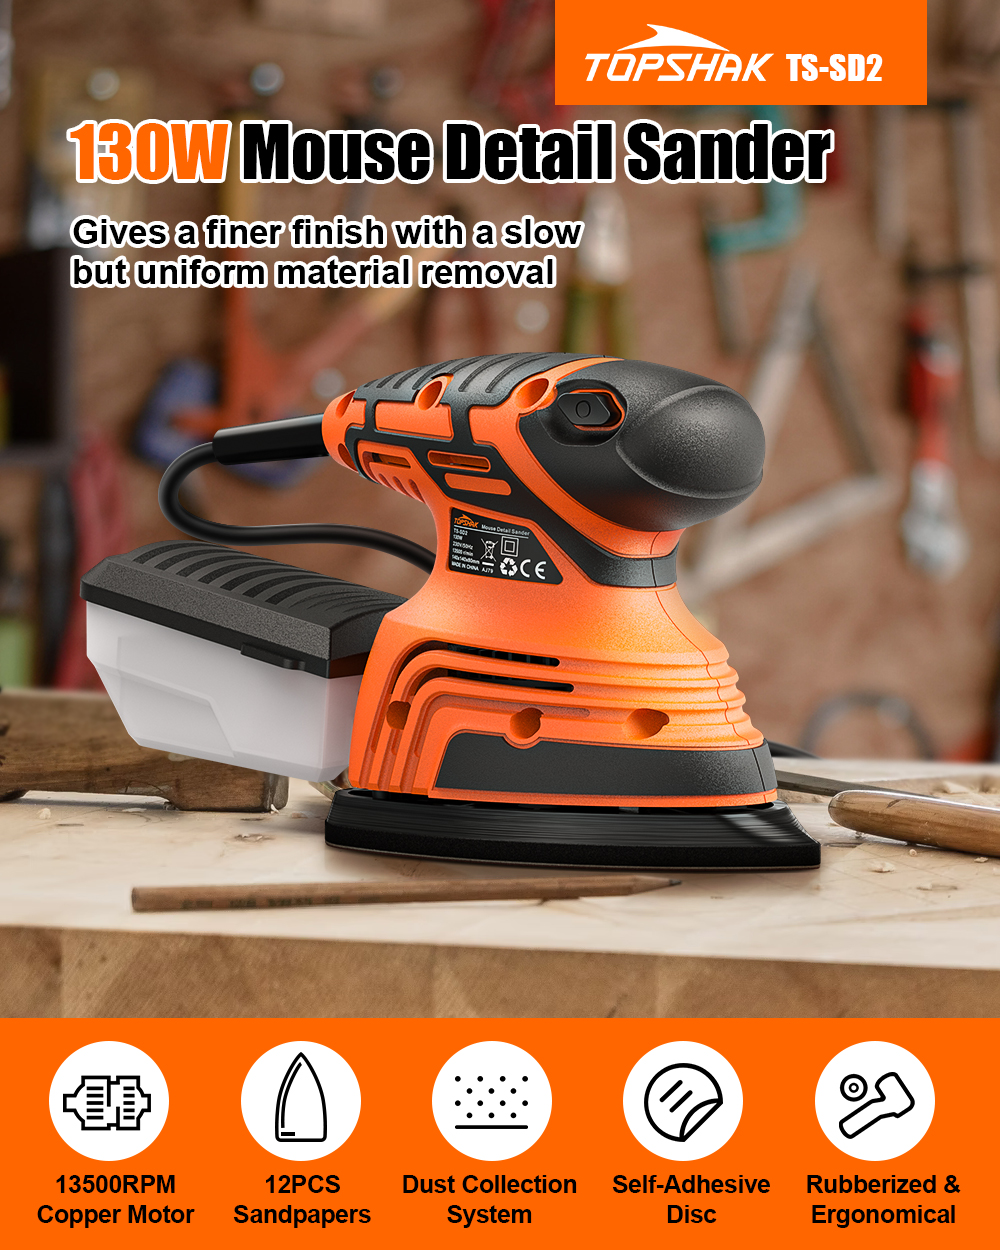 TOPSHAK-TS-SD2-130W-Mouse-Detail-Sander-Small-Sander-with-12Pcs-Sandpapers-Dust-Collection-Box-Hand--1917774-1